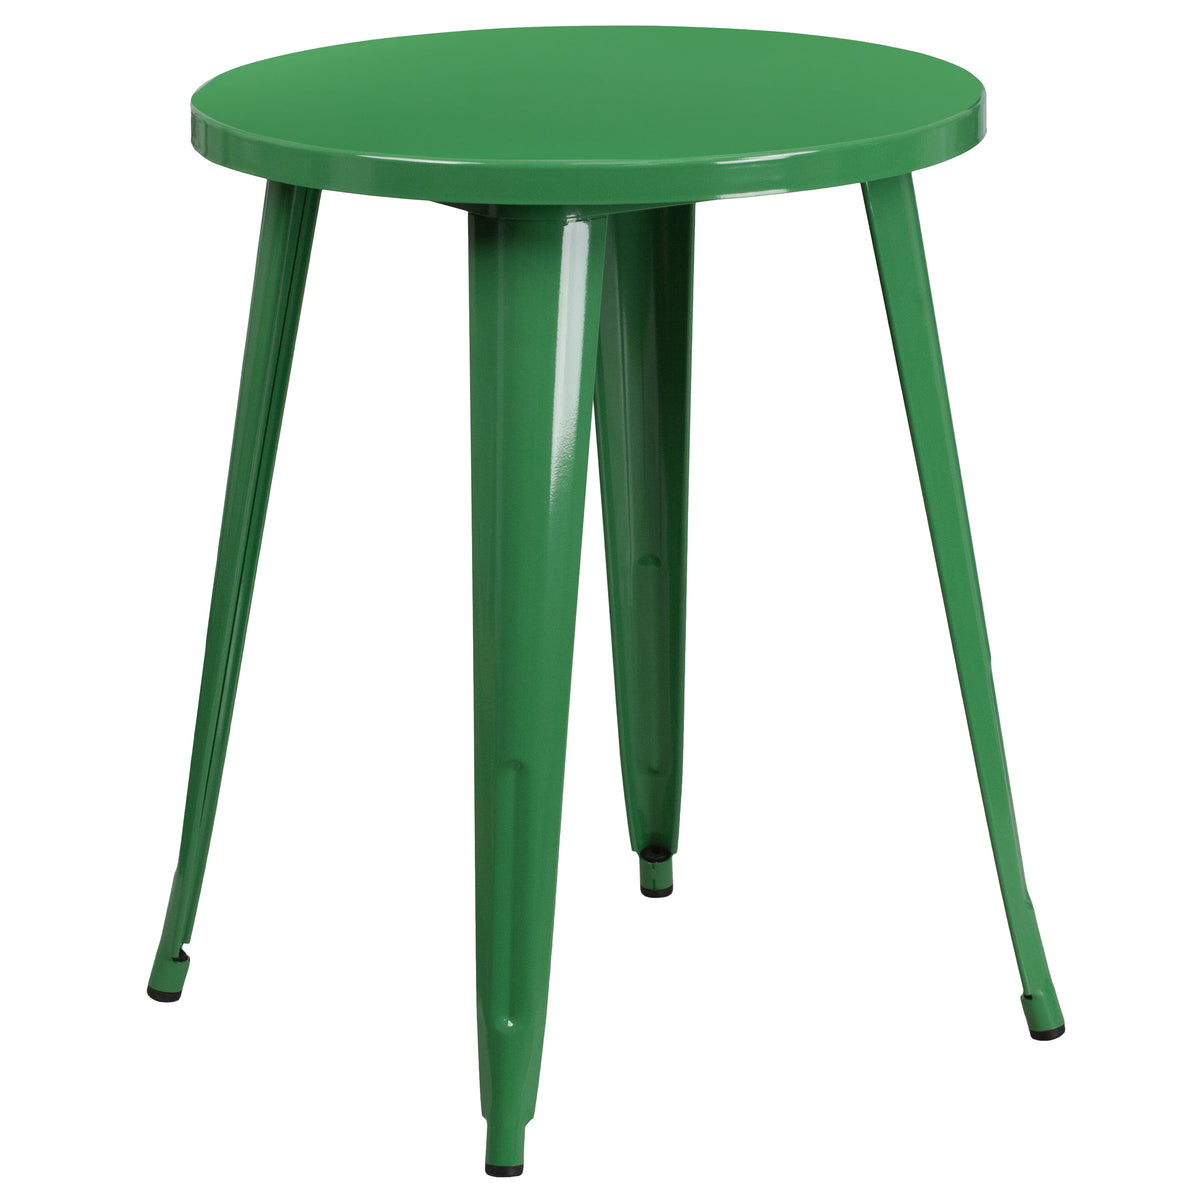 Green |#| 24inch Round Green Metal Indoor-Outdoor Table Set with 2 Vertical Slat Back Chairs